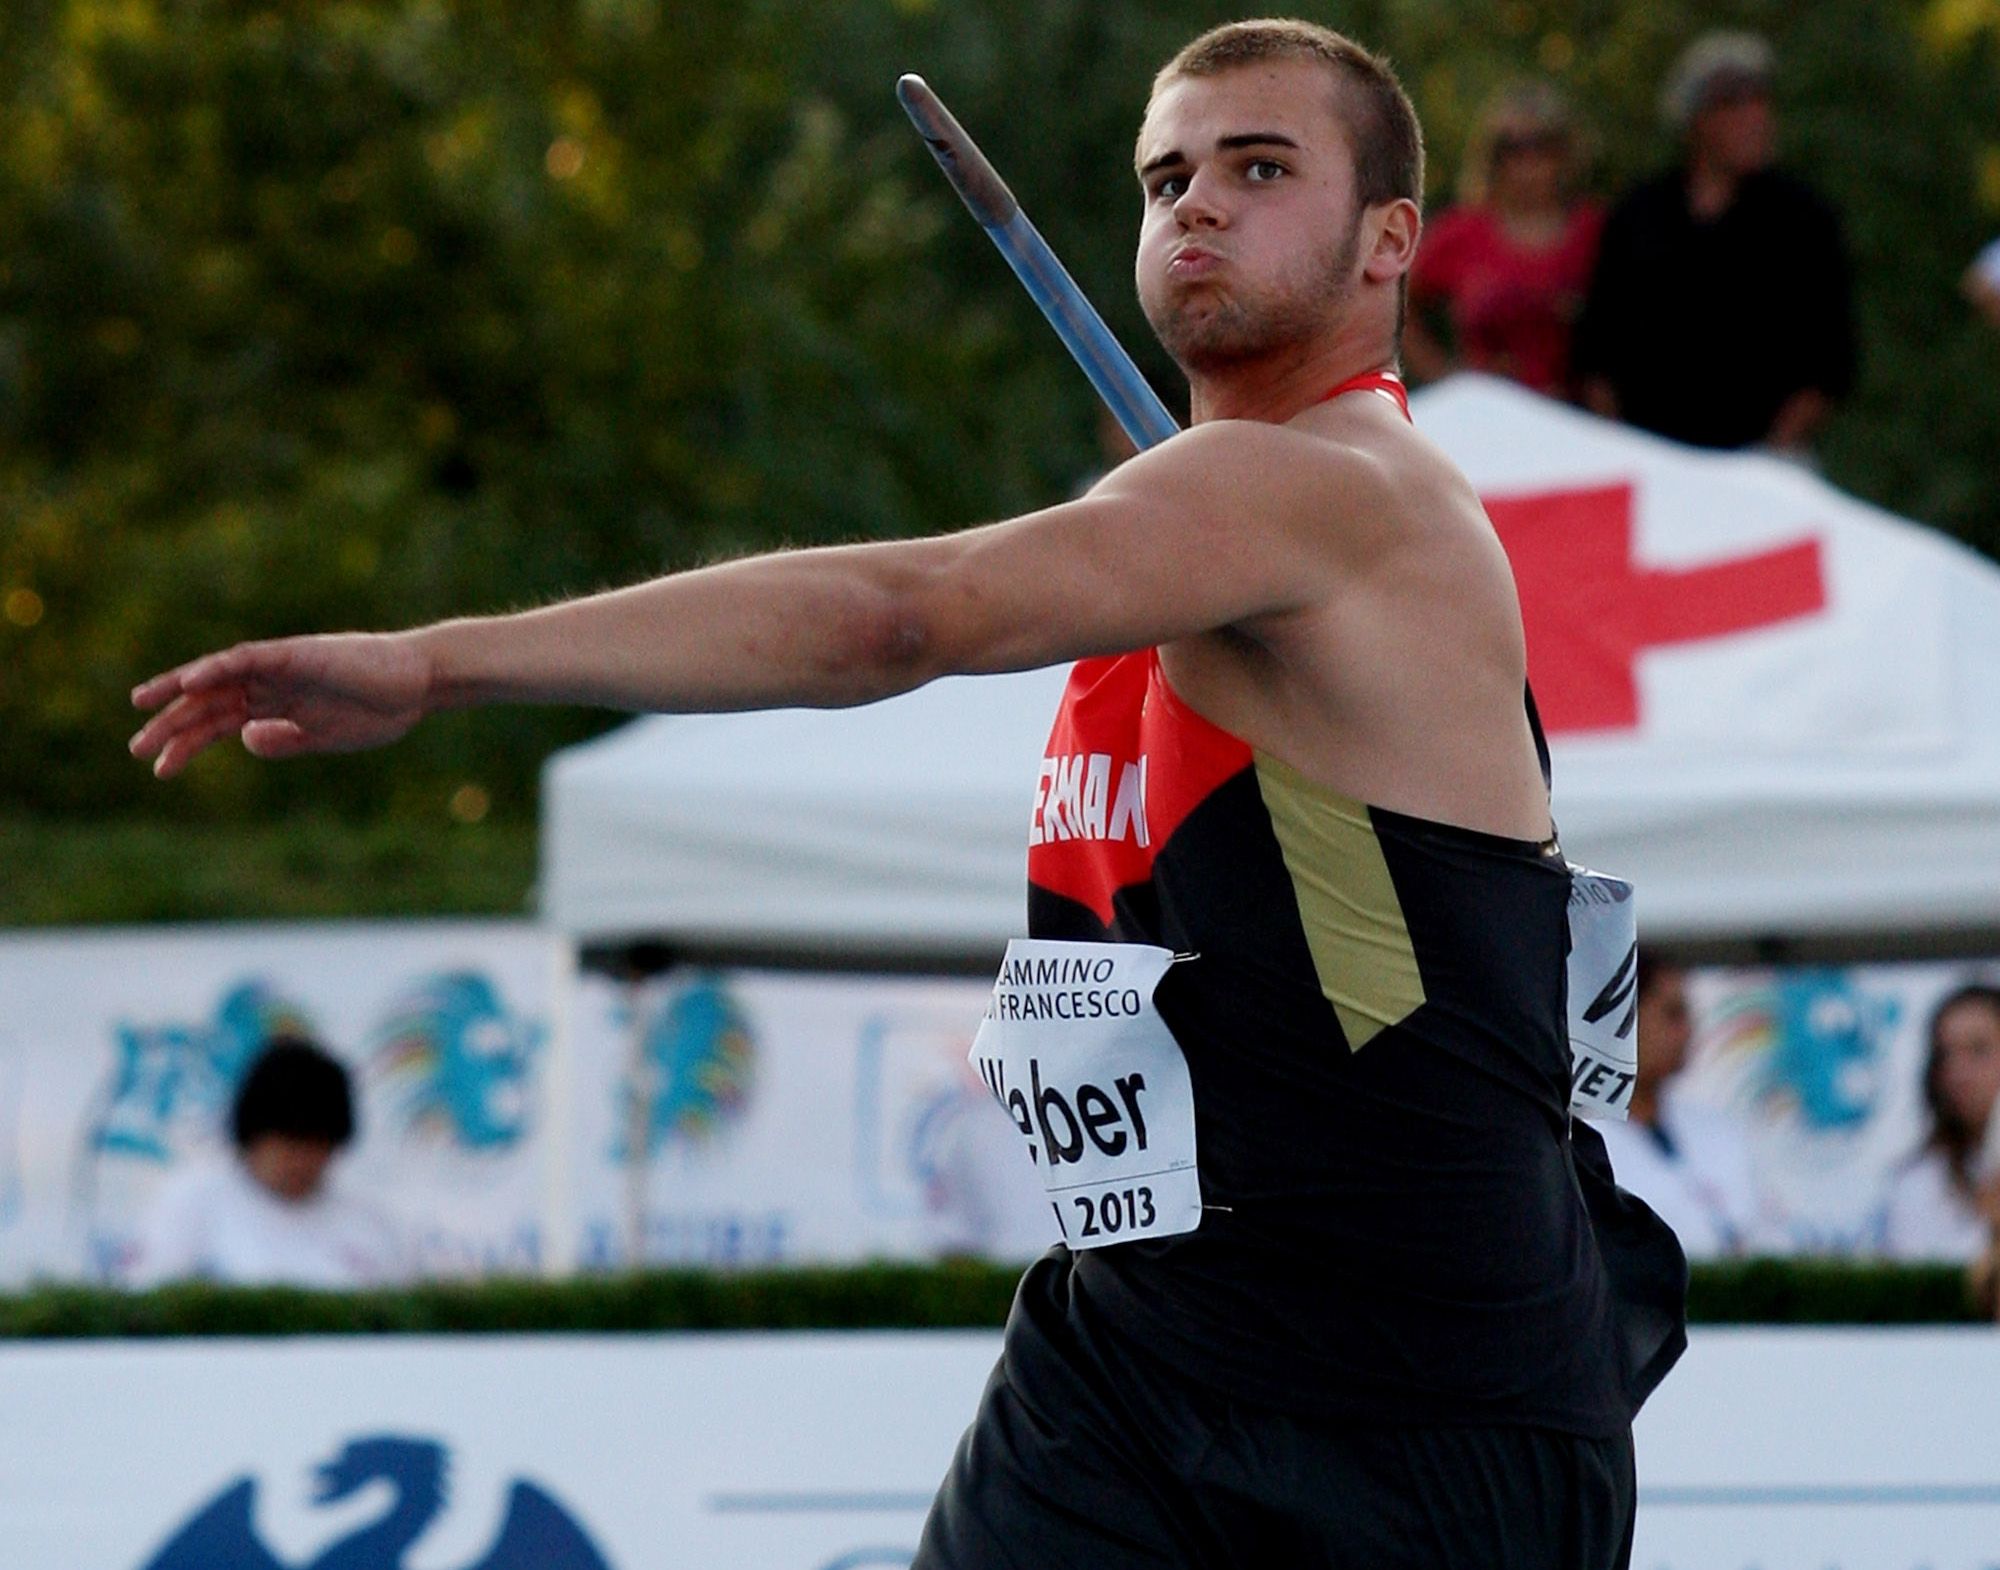 Julian Weber in action at the 2013 European U20 Championships in Rieti